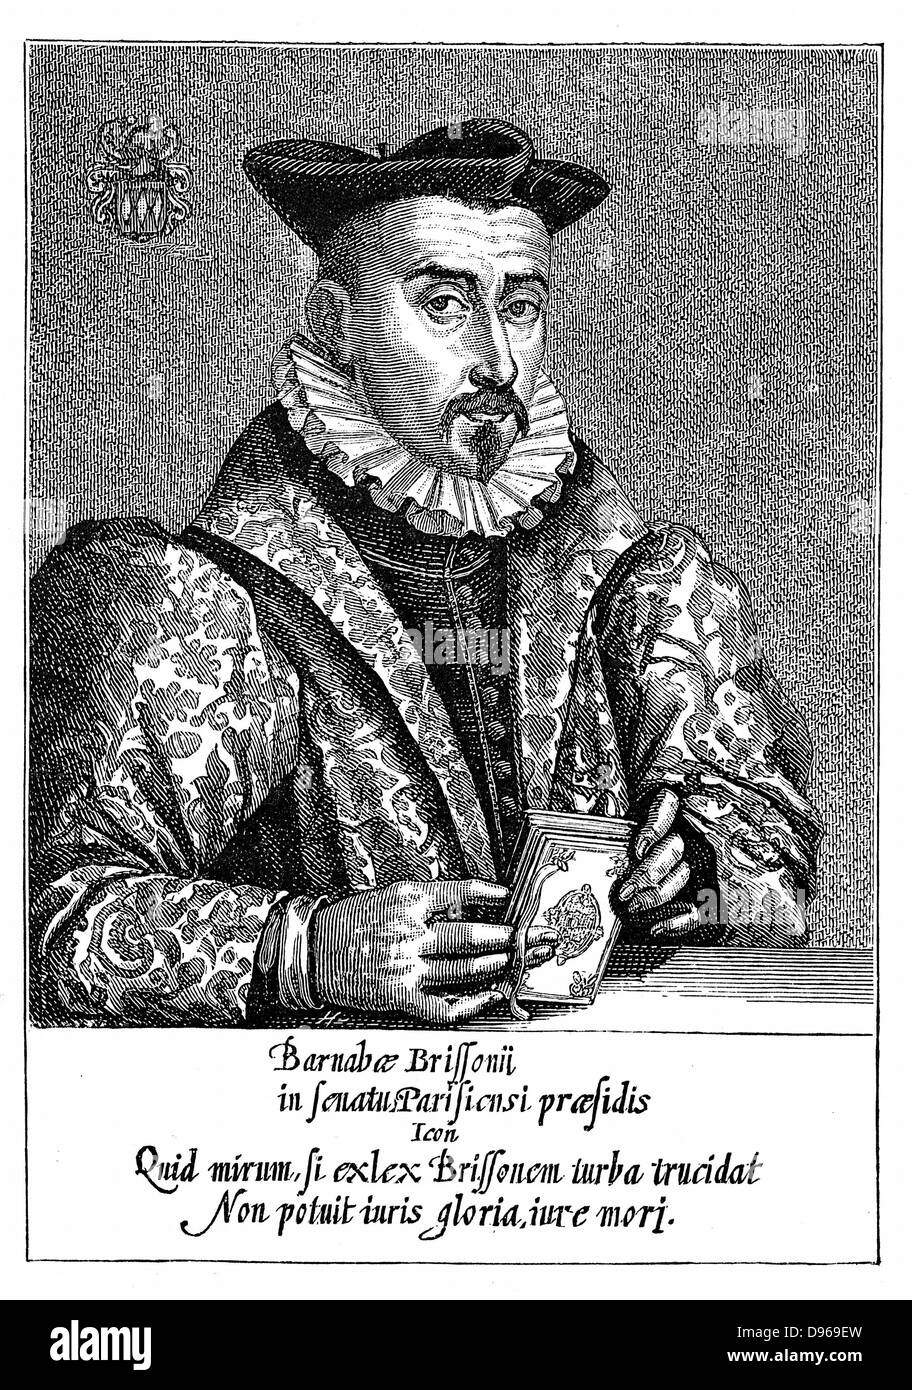 Barnabe Brisson (1531-91) French philologist and jurist. President of Parliament (Parlement) of Paris 1588. Executed by extreme members of the League while Charles of Lorraine, Duke of Mayenne, absent. Engraving. Stock Photo